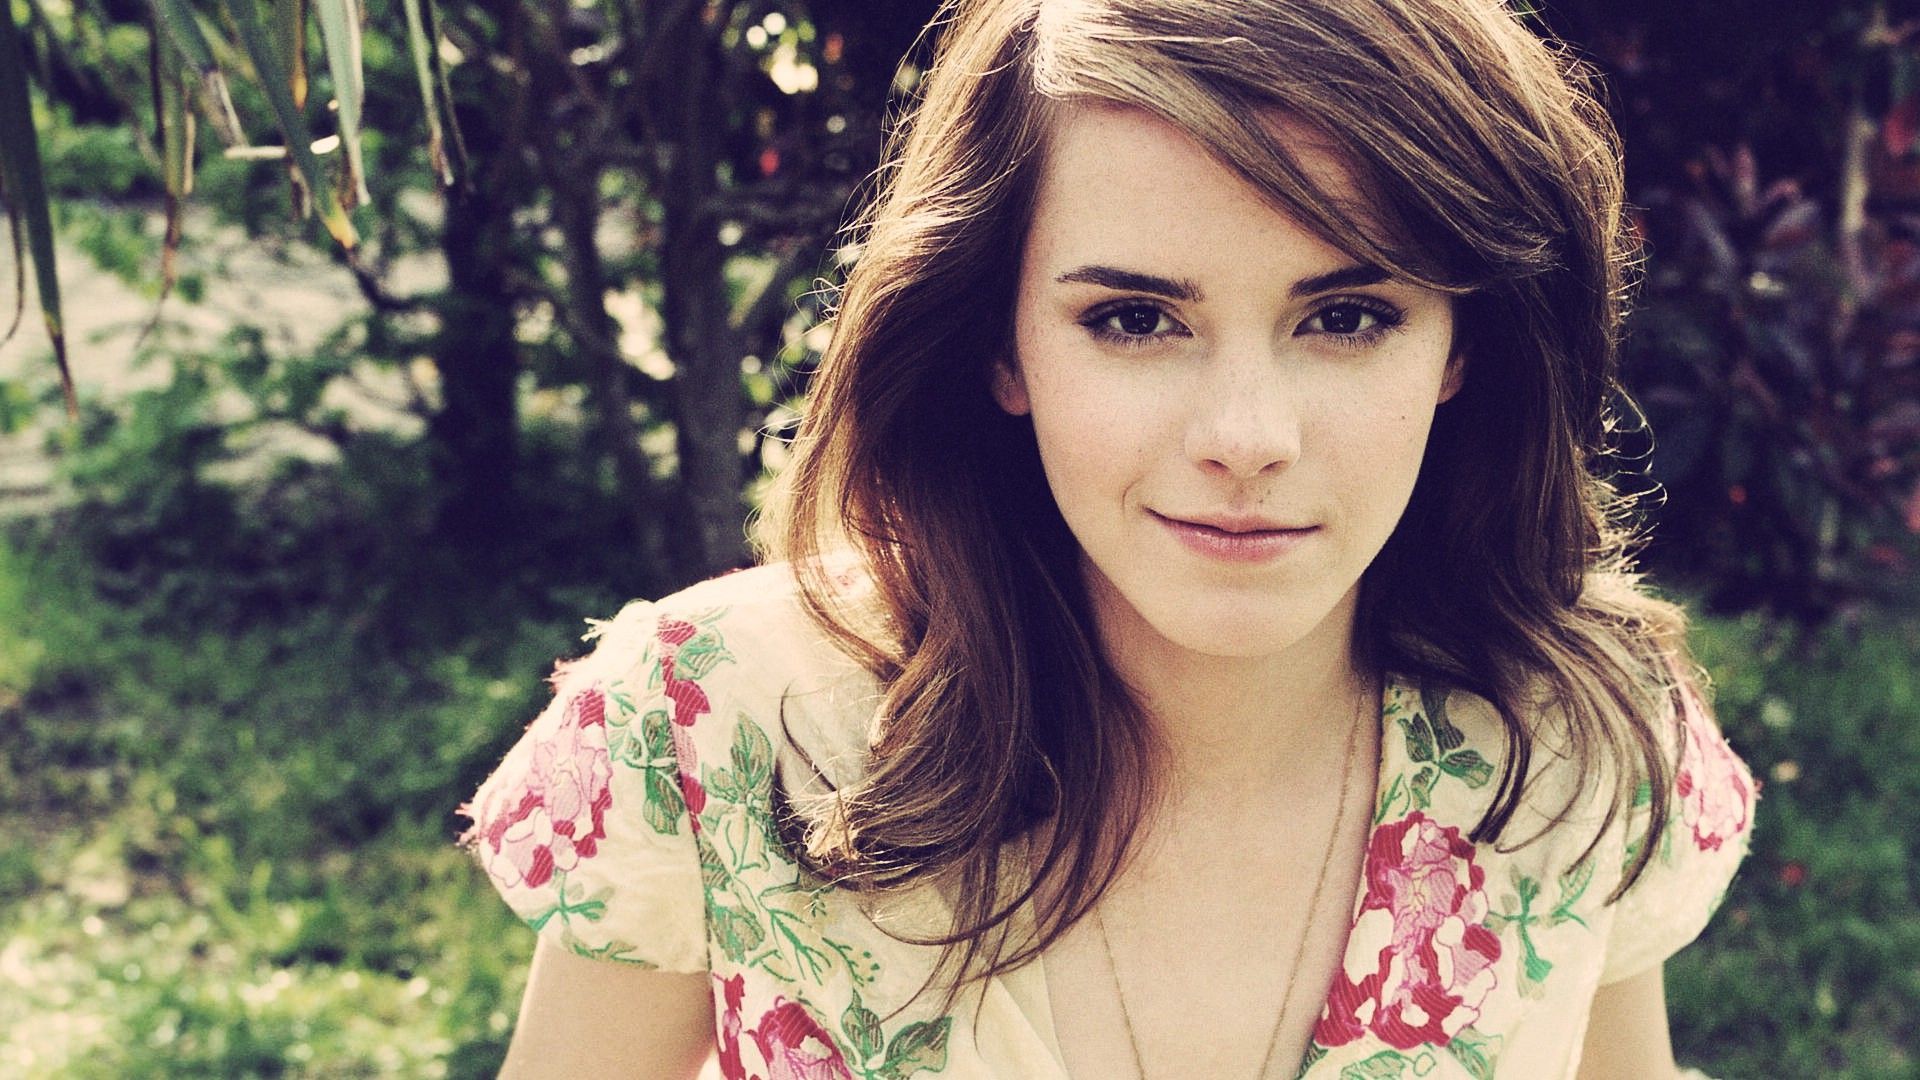 Emma Watson Cast As Belle In Uping Live Action Beauty